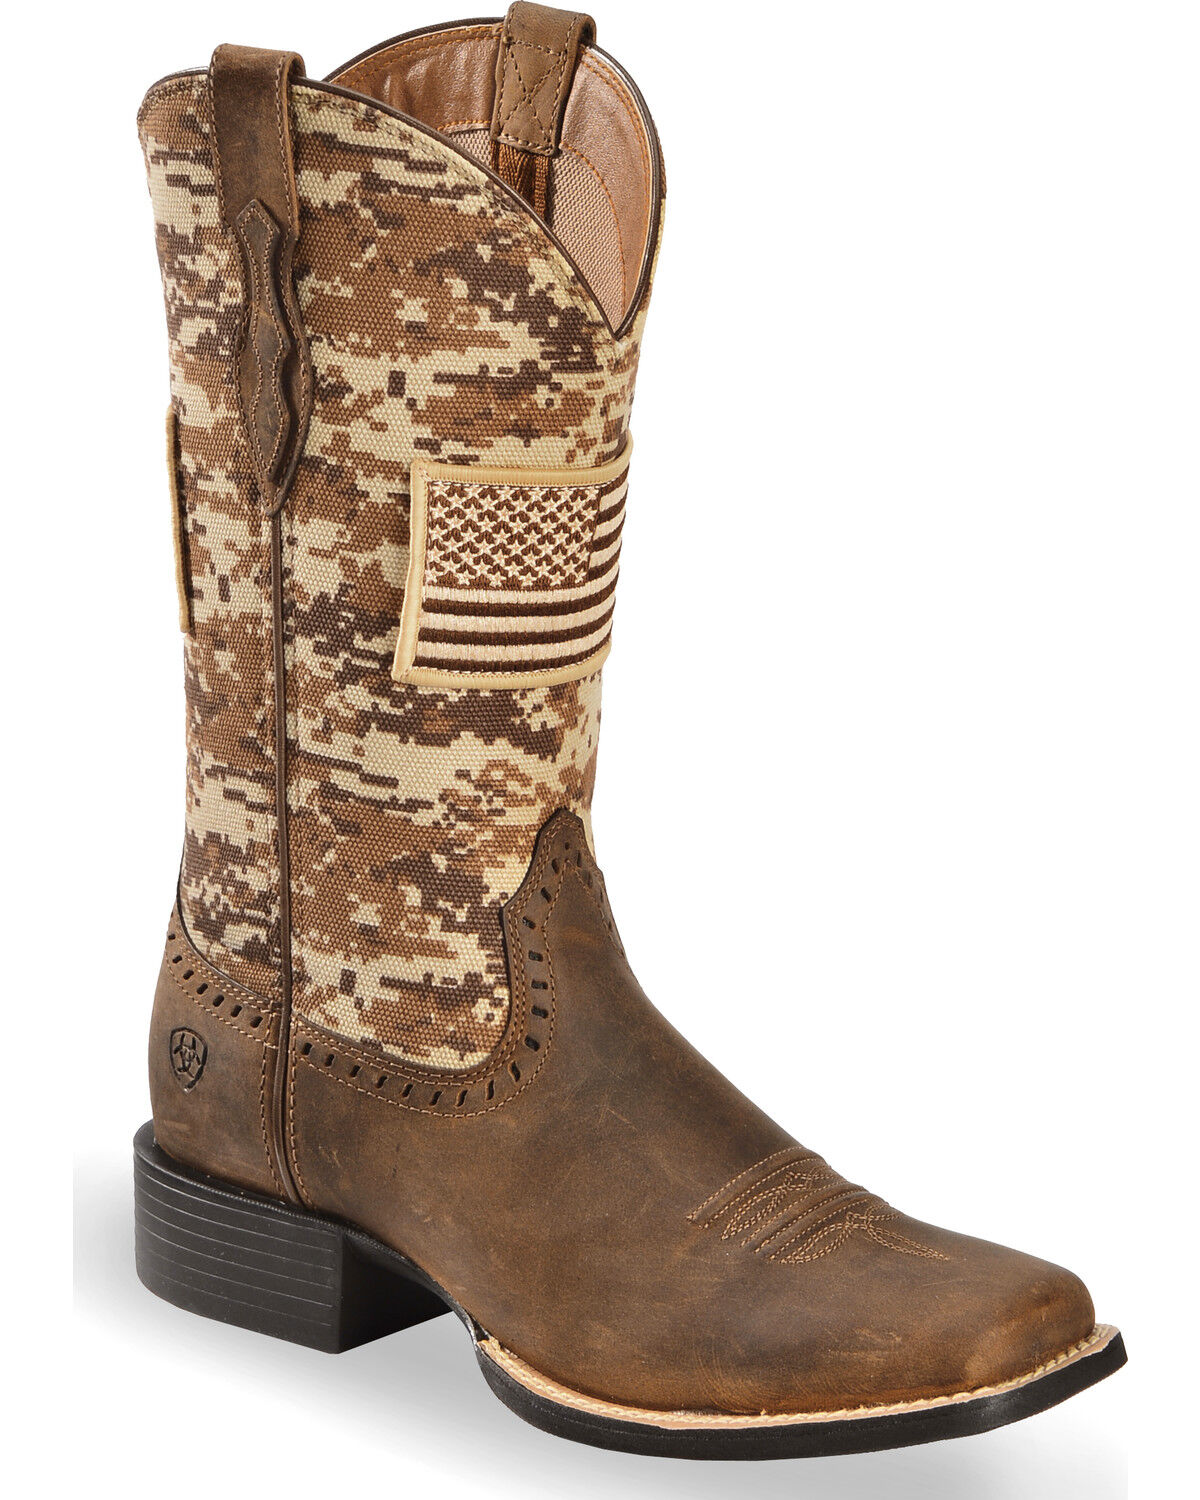 ariat women's boots on sale